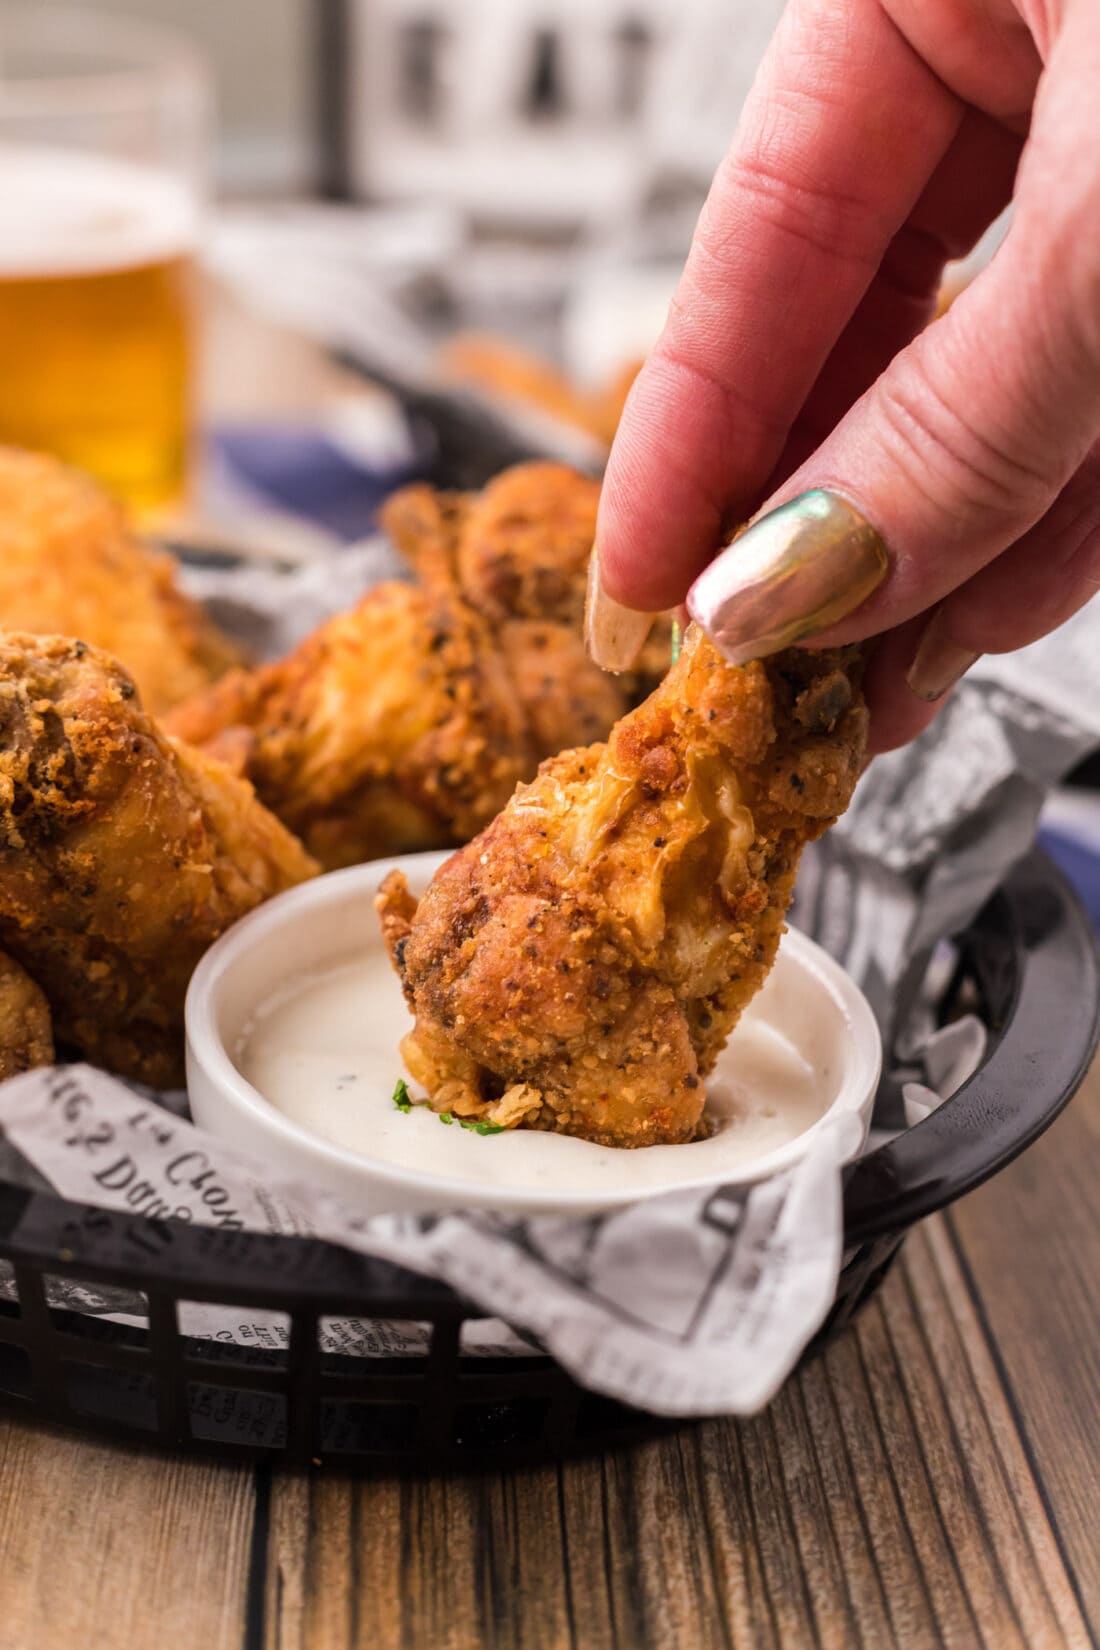 A Fried Chicken Wing being dipped into a bowl of ranch